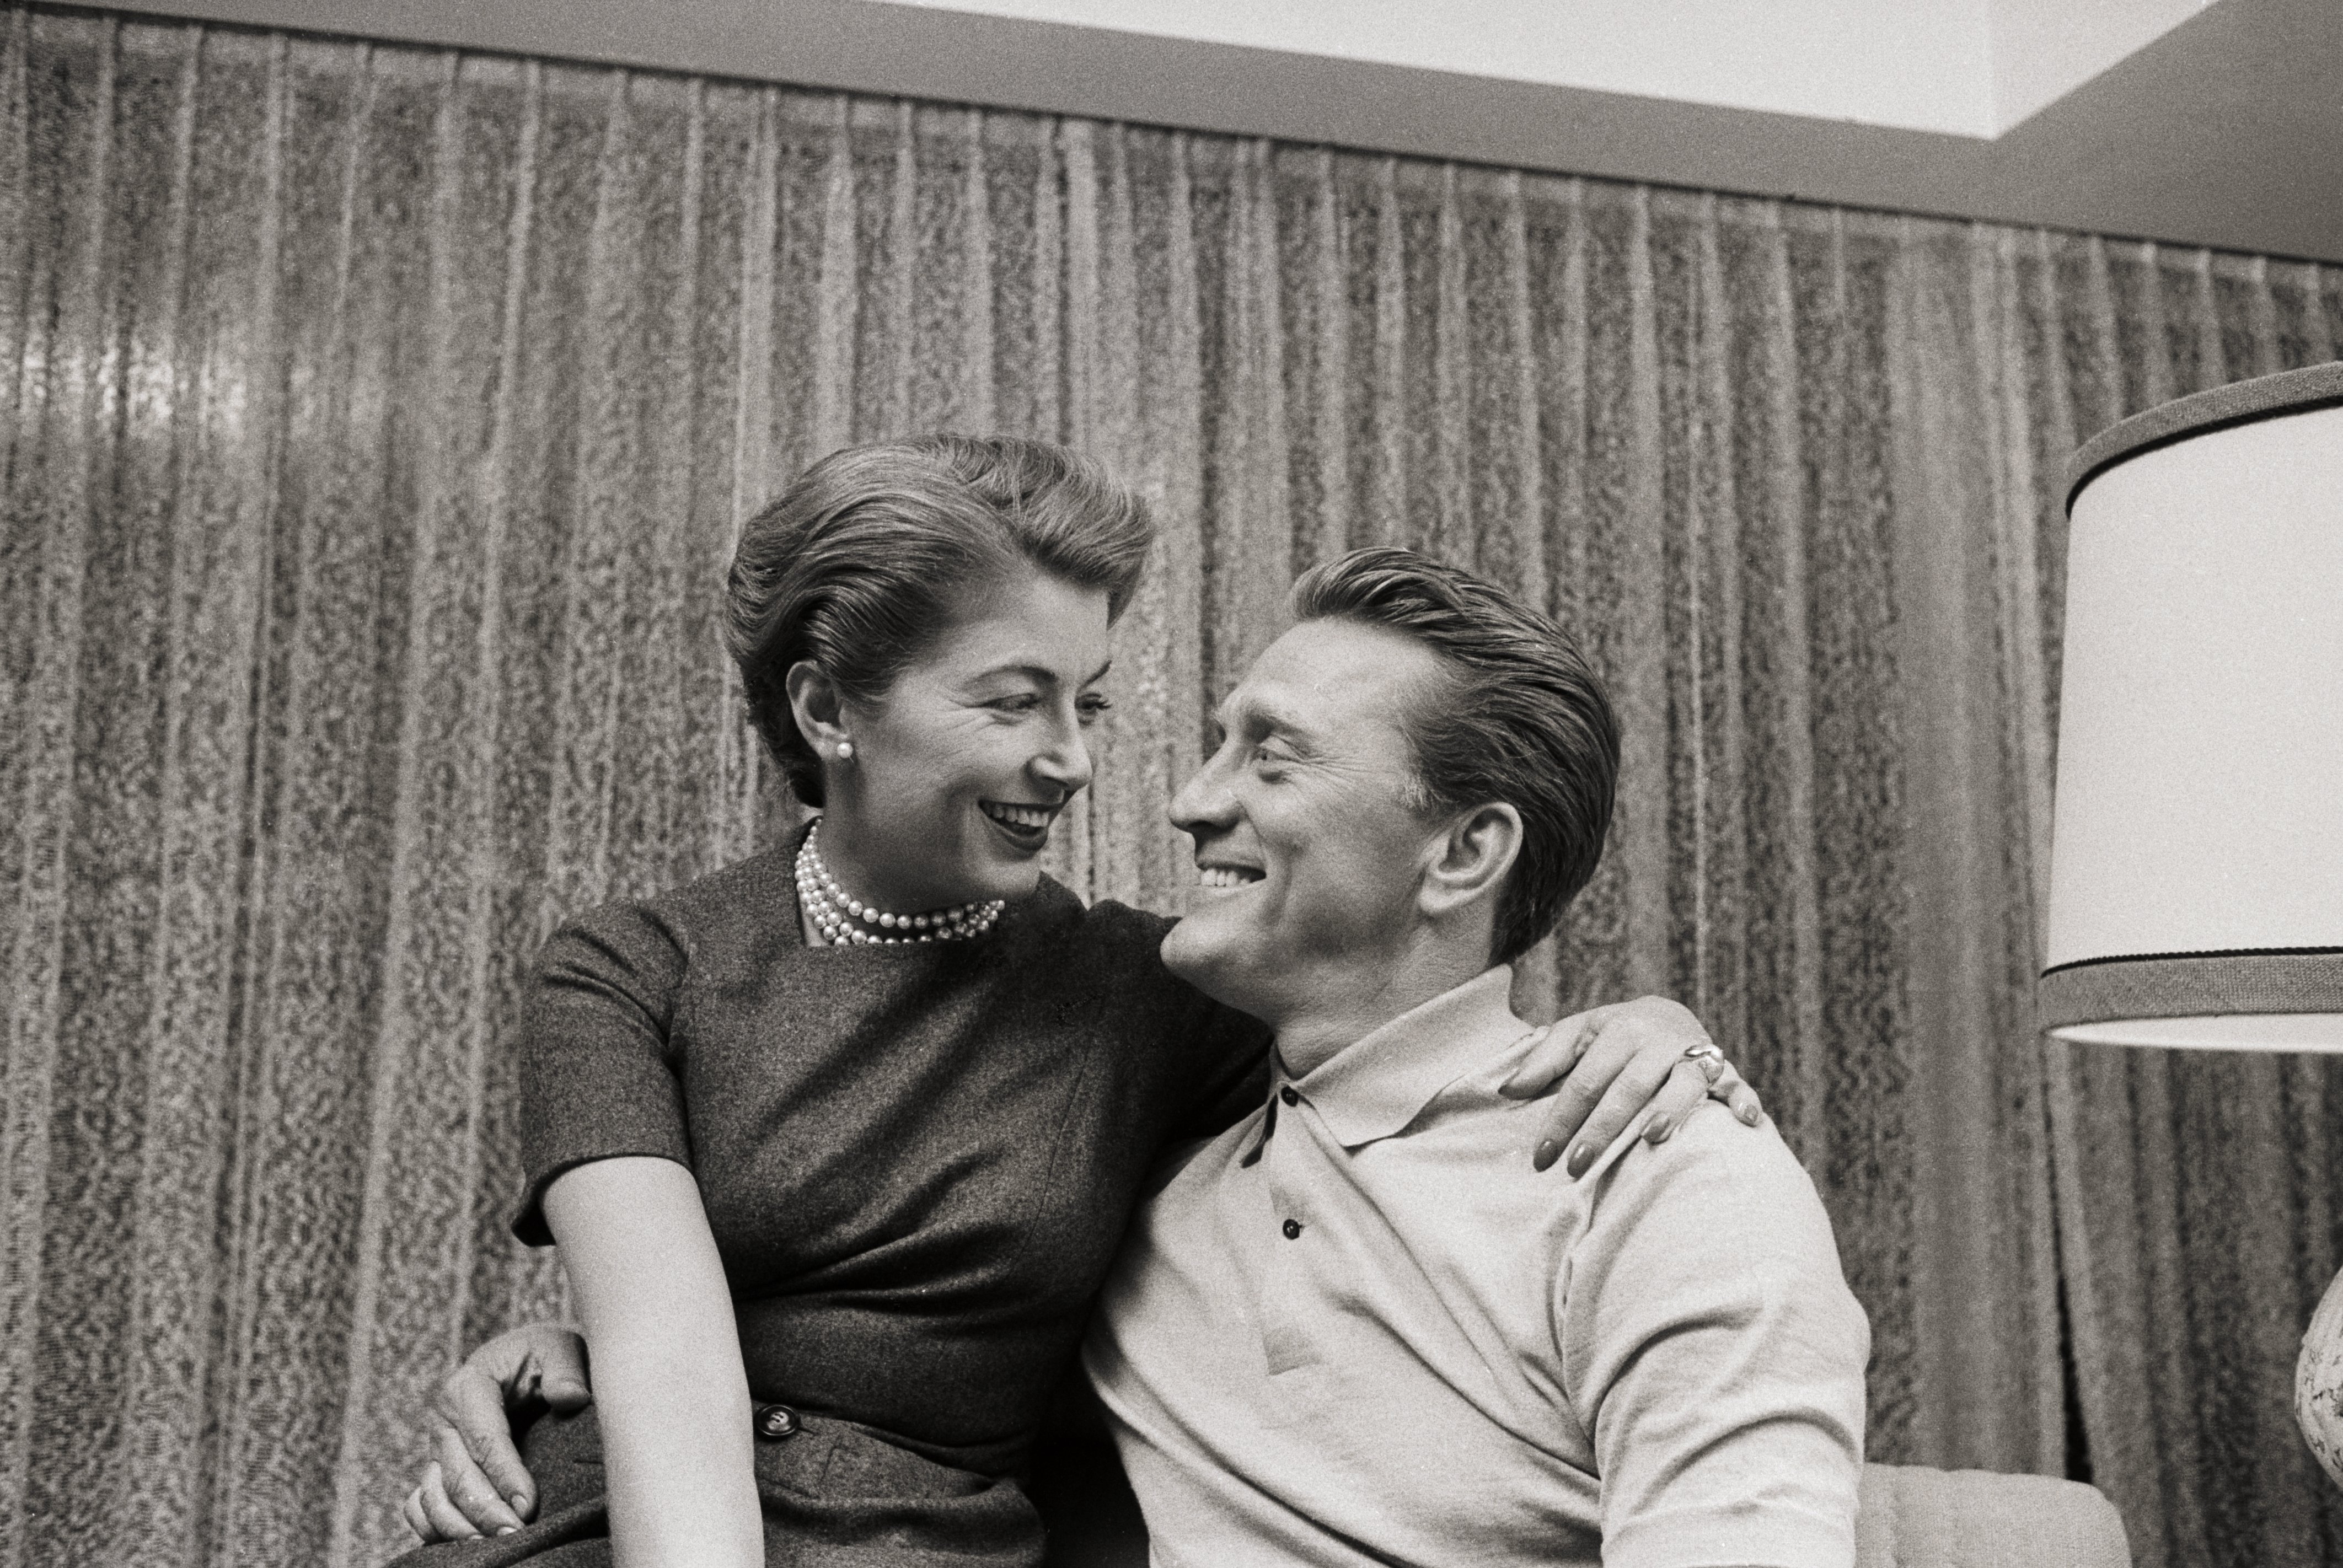 Kirk Douglas and his wife Anna on February 18, 1957 | Photo: Getty Images